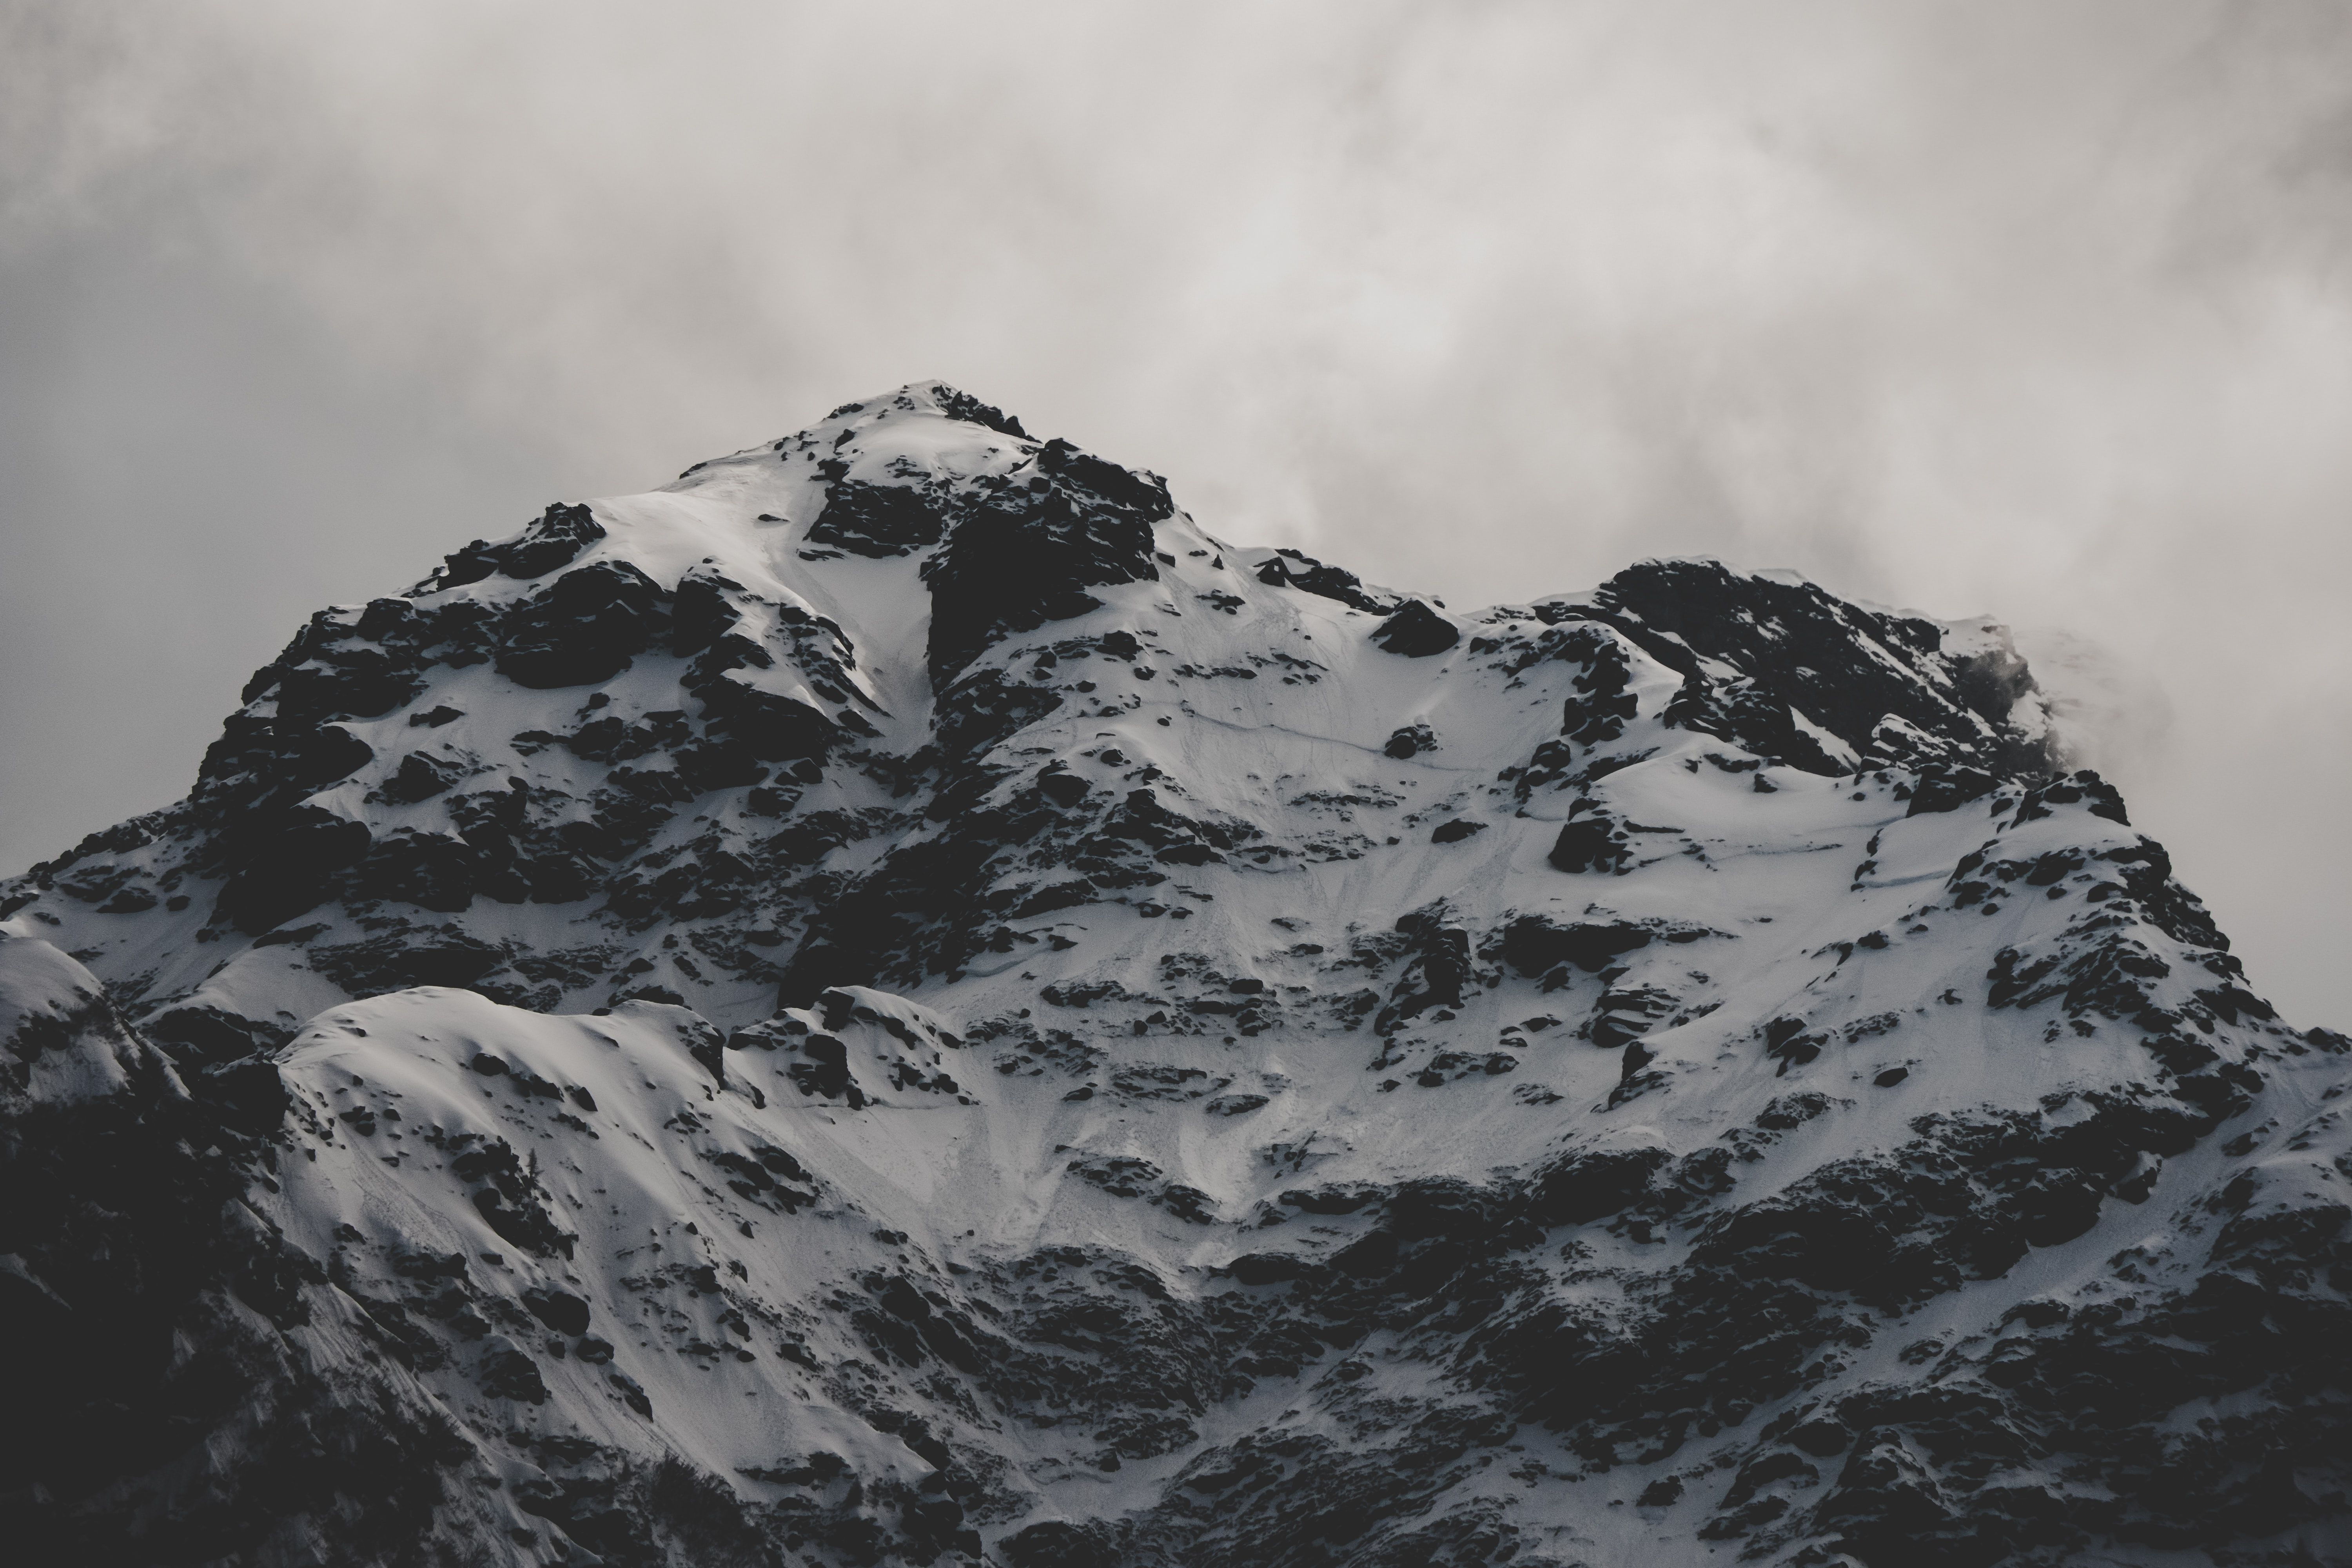 Dark Mountain Picture. Download Free Image